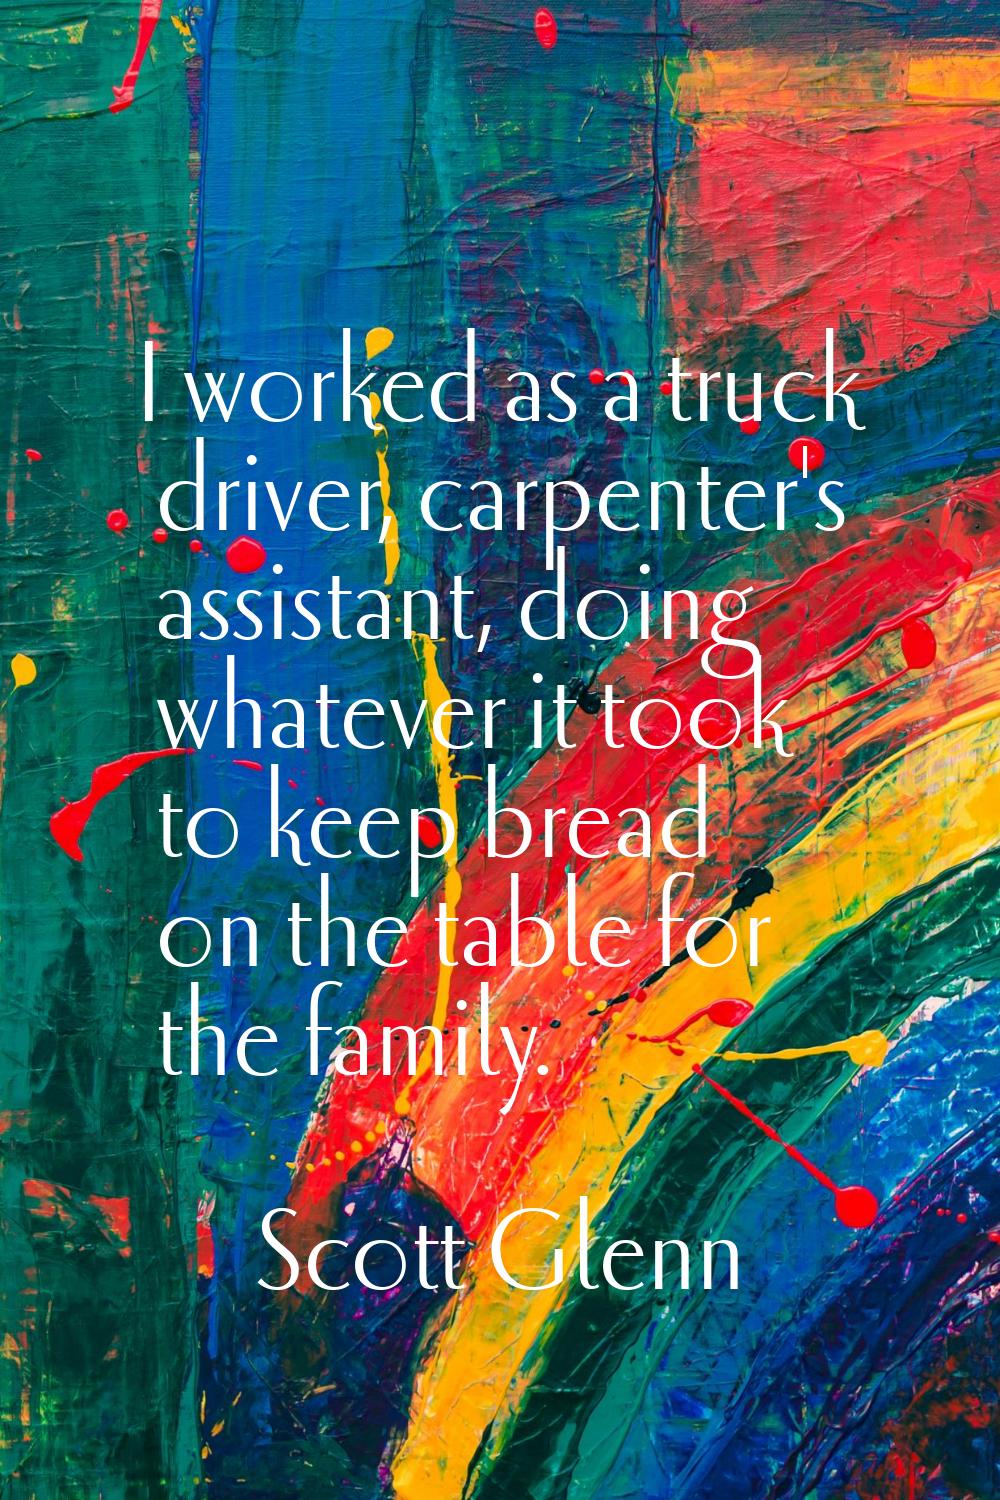 I worked as a truck driver, carpenter's assistant, doing whatever it took to keep bread on the tabl